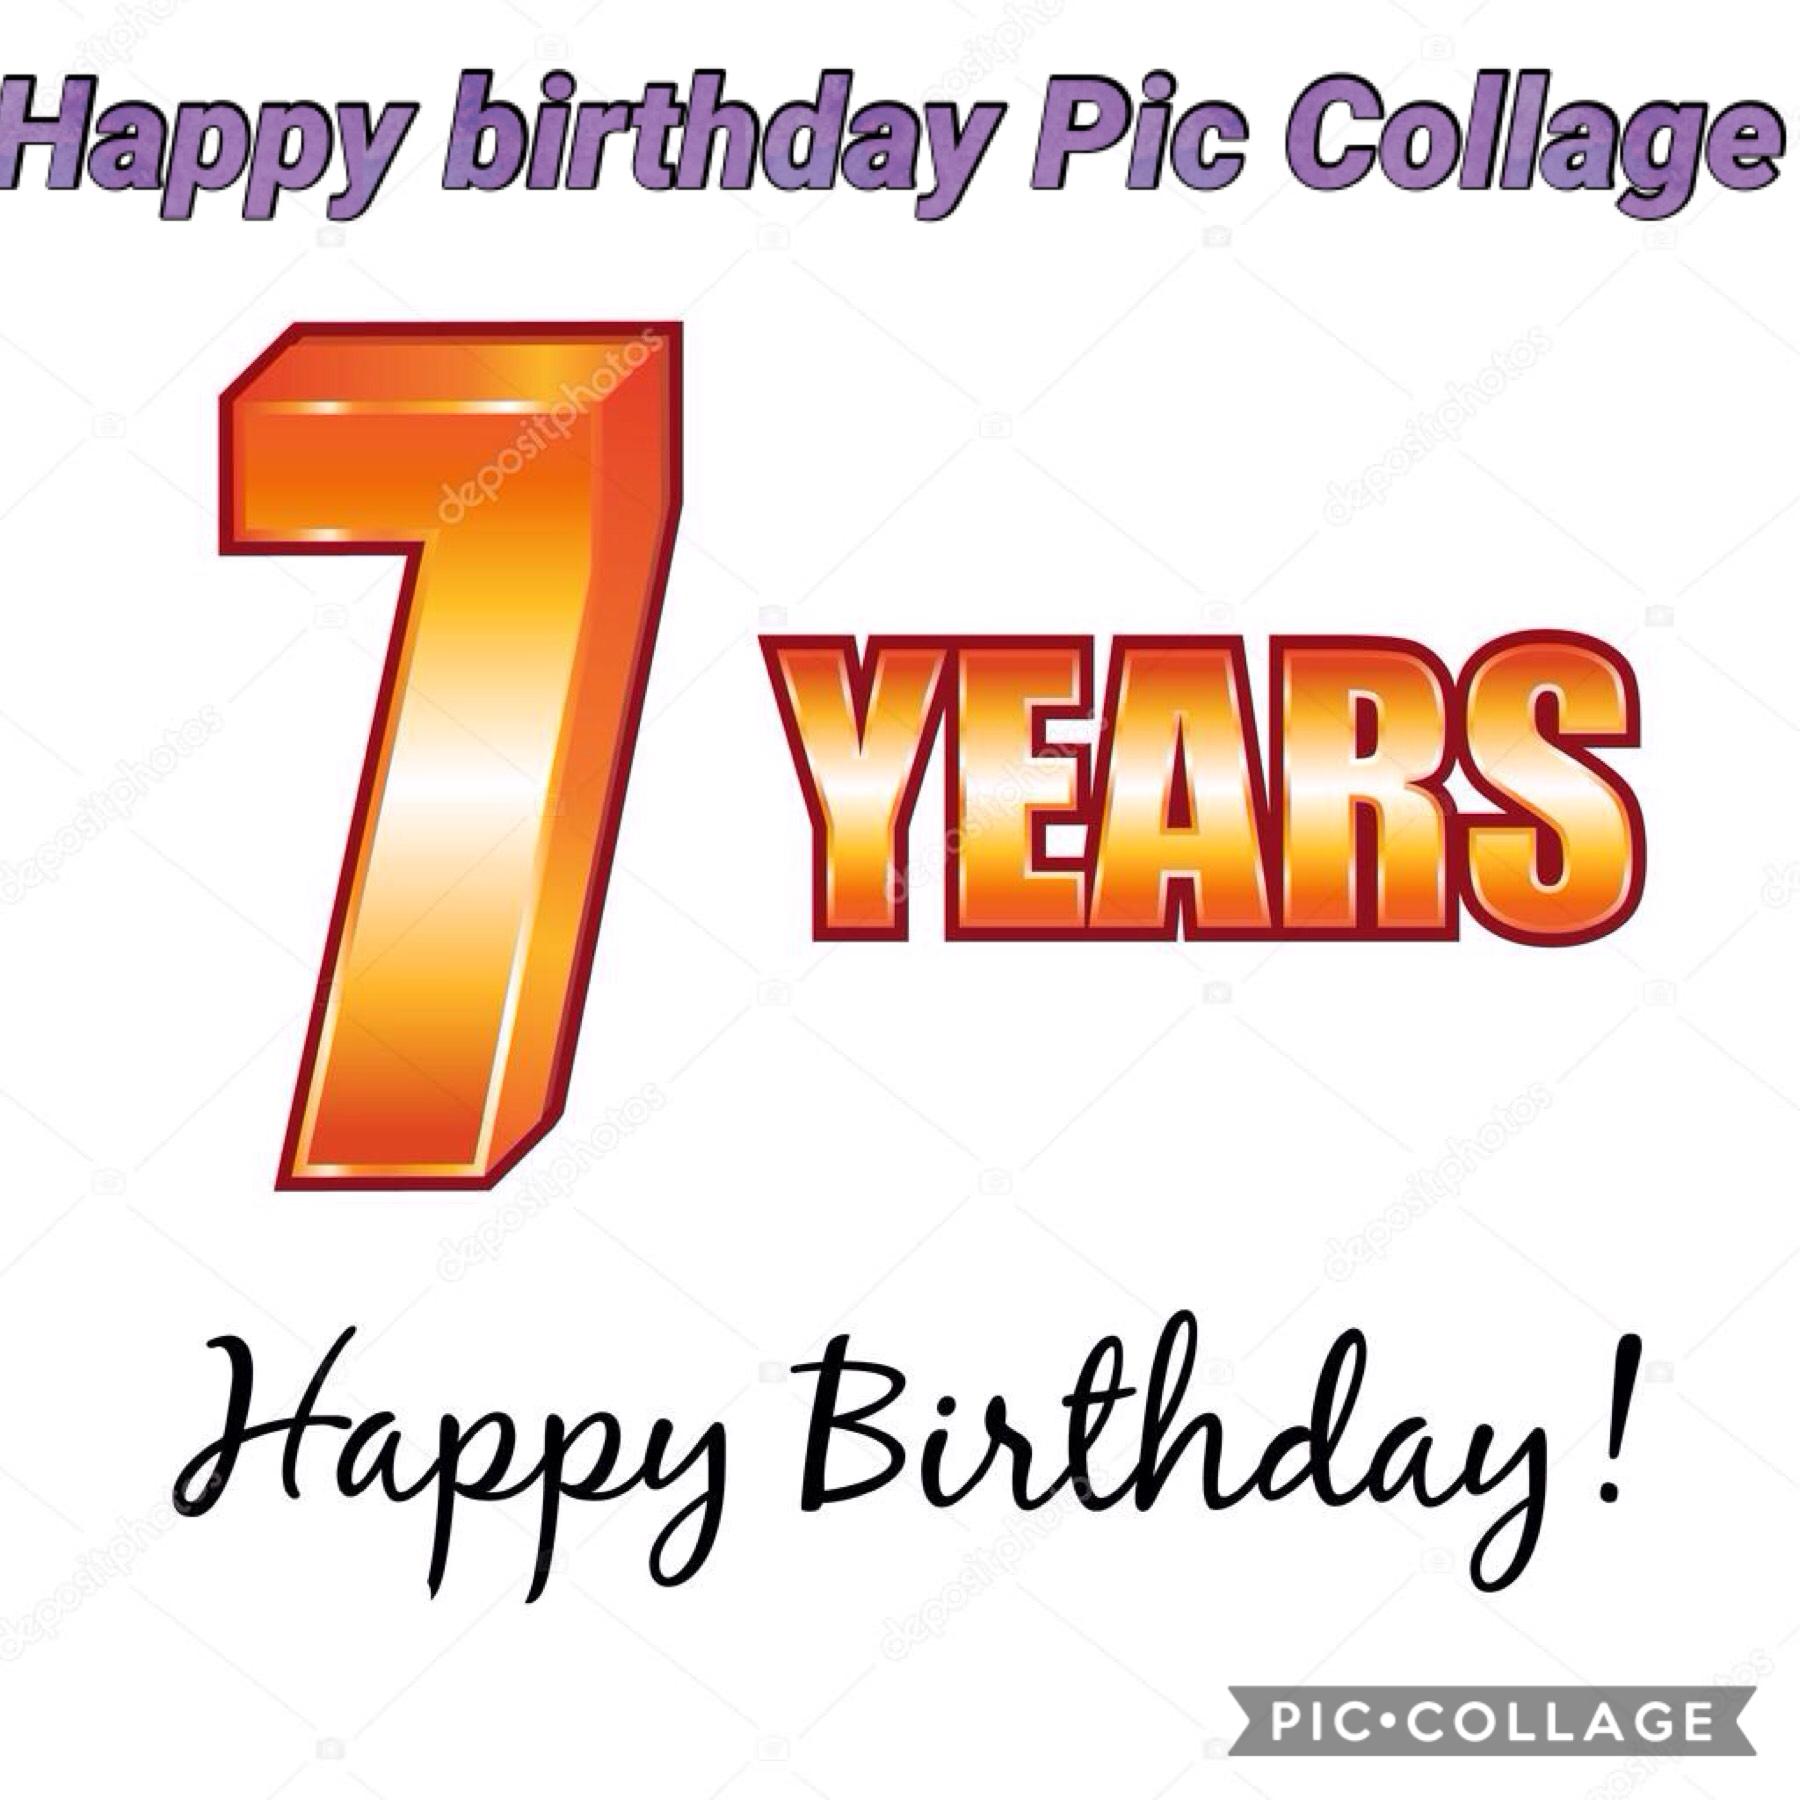 Happy 7th birthday pic collage